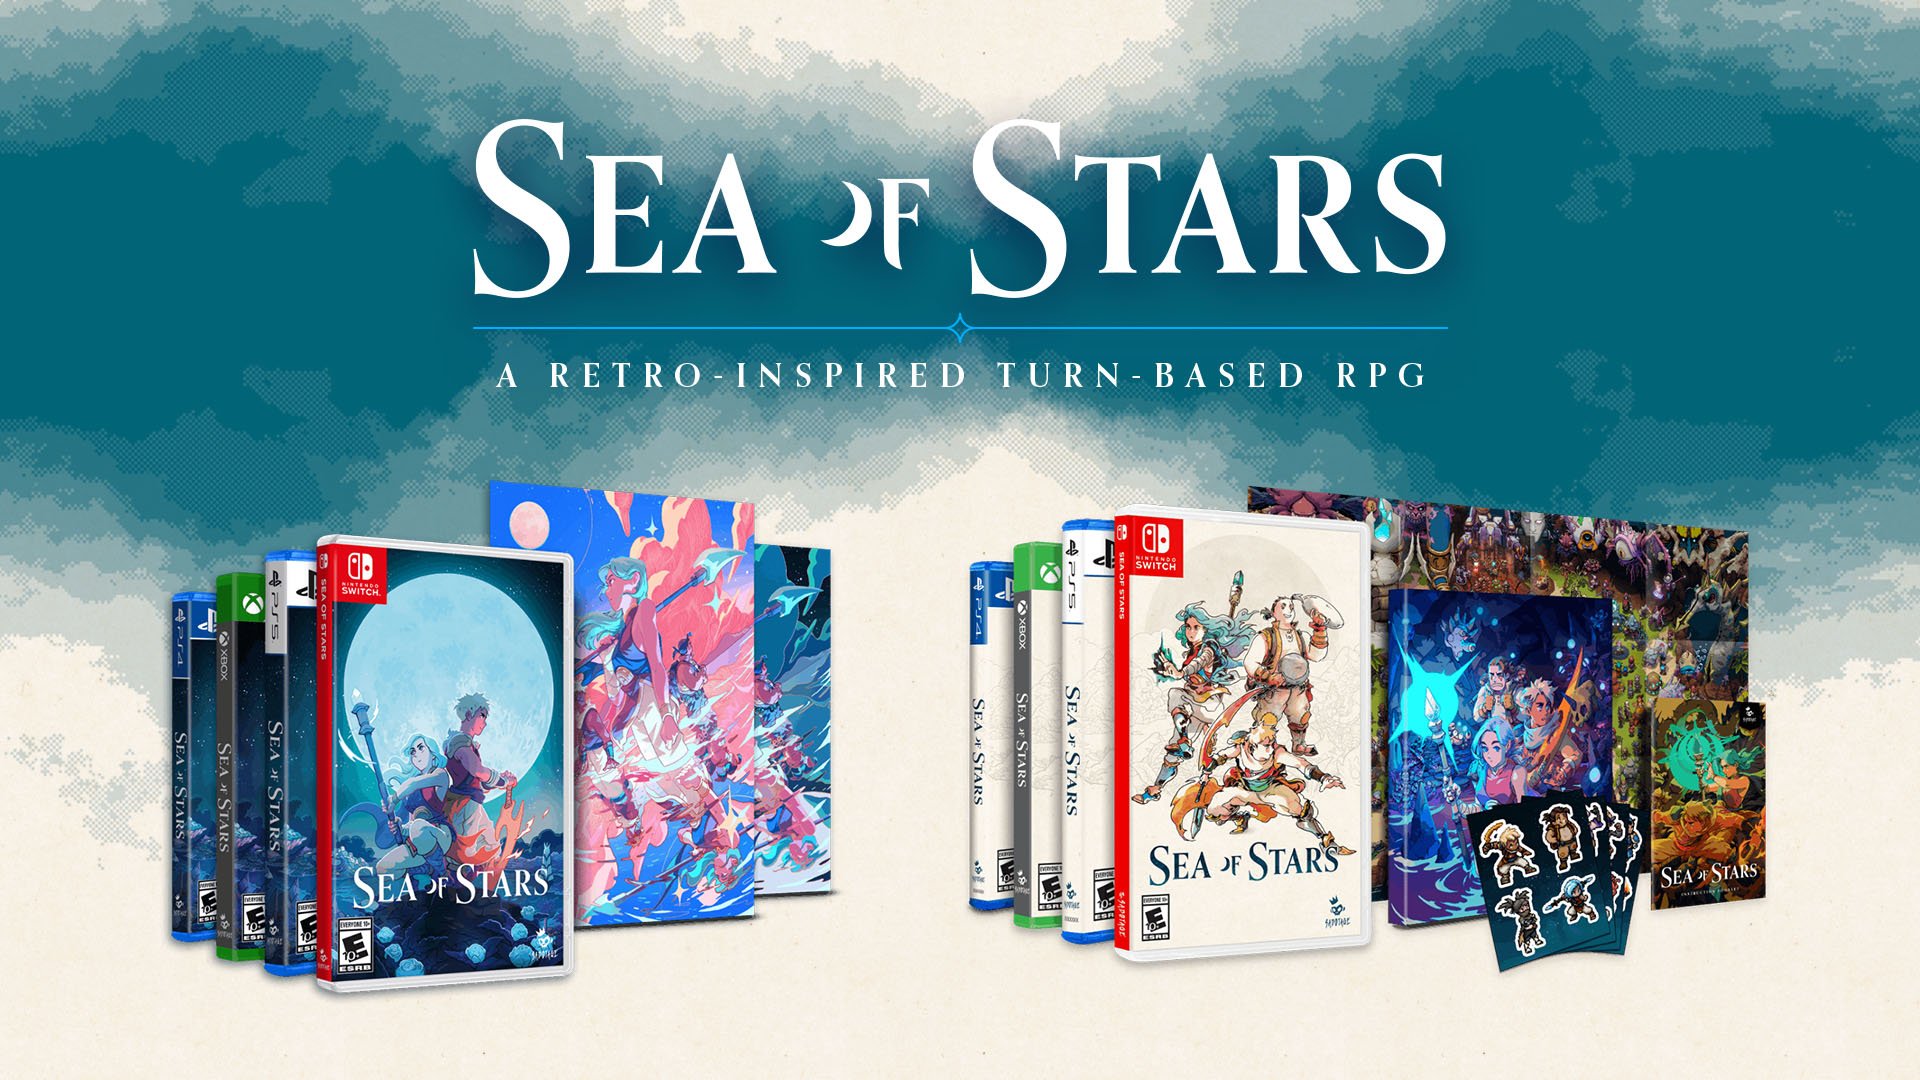 Sea of Stars physical edition (PS5, PS4, XS, NSW) launches May 10